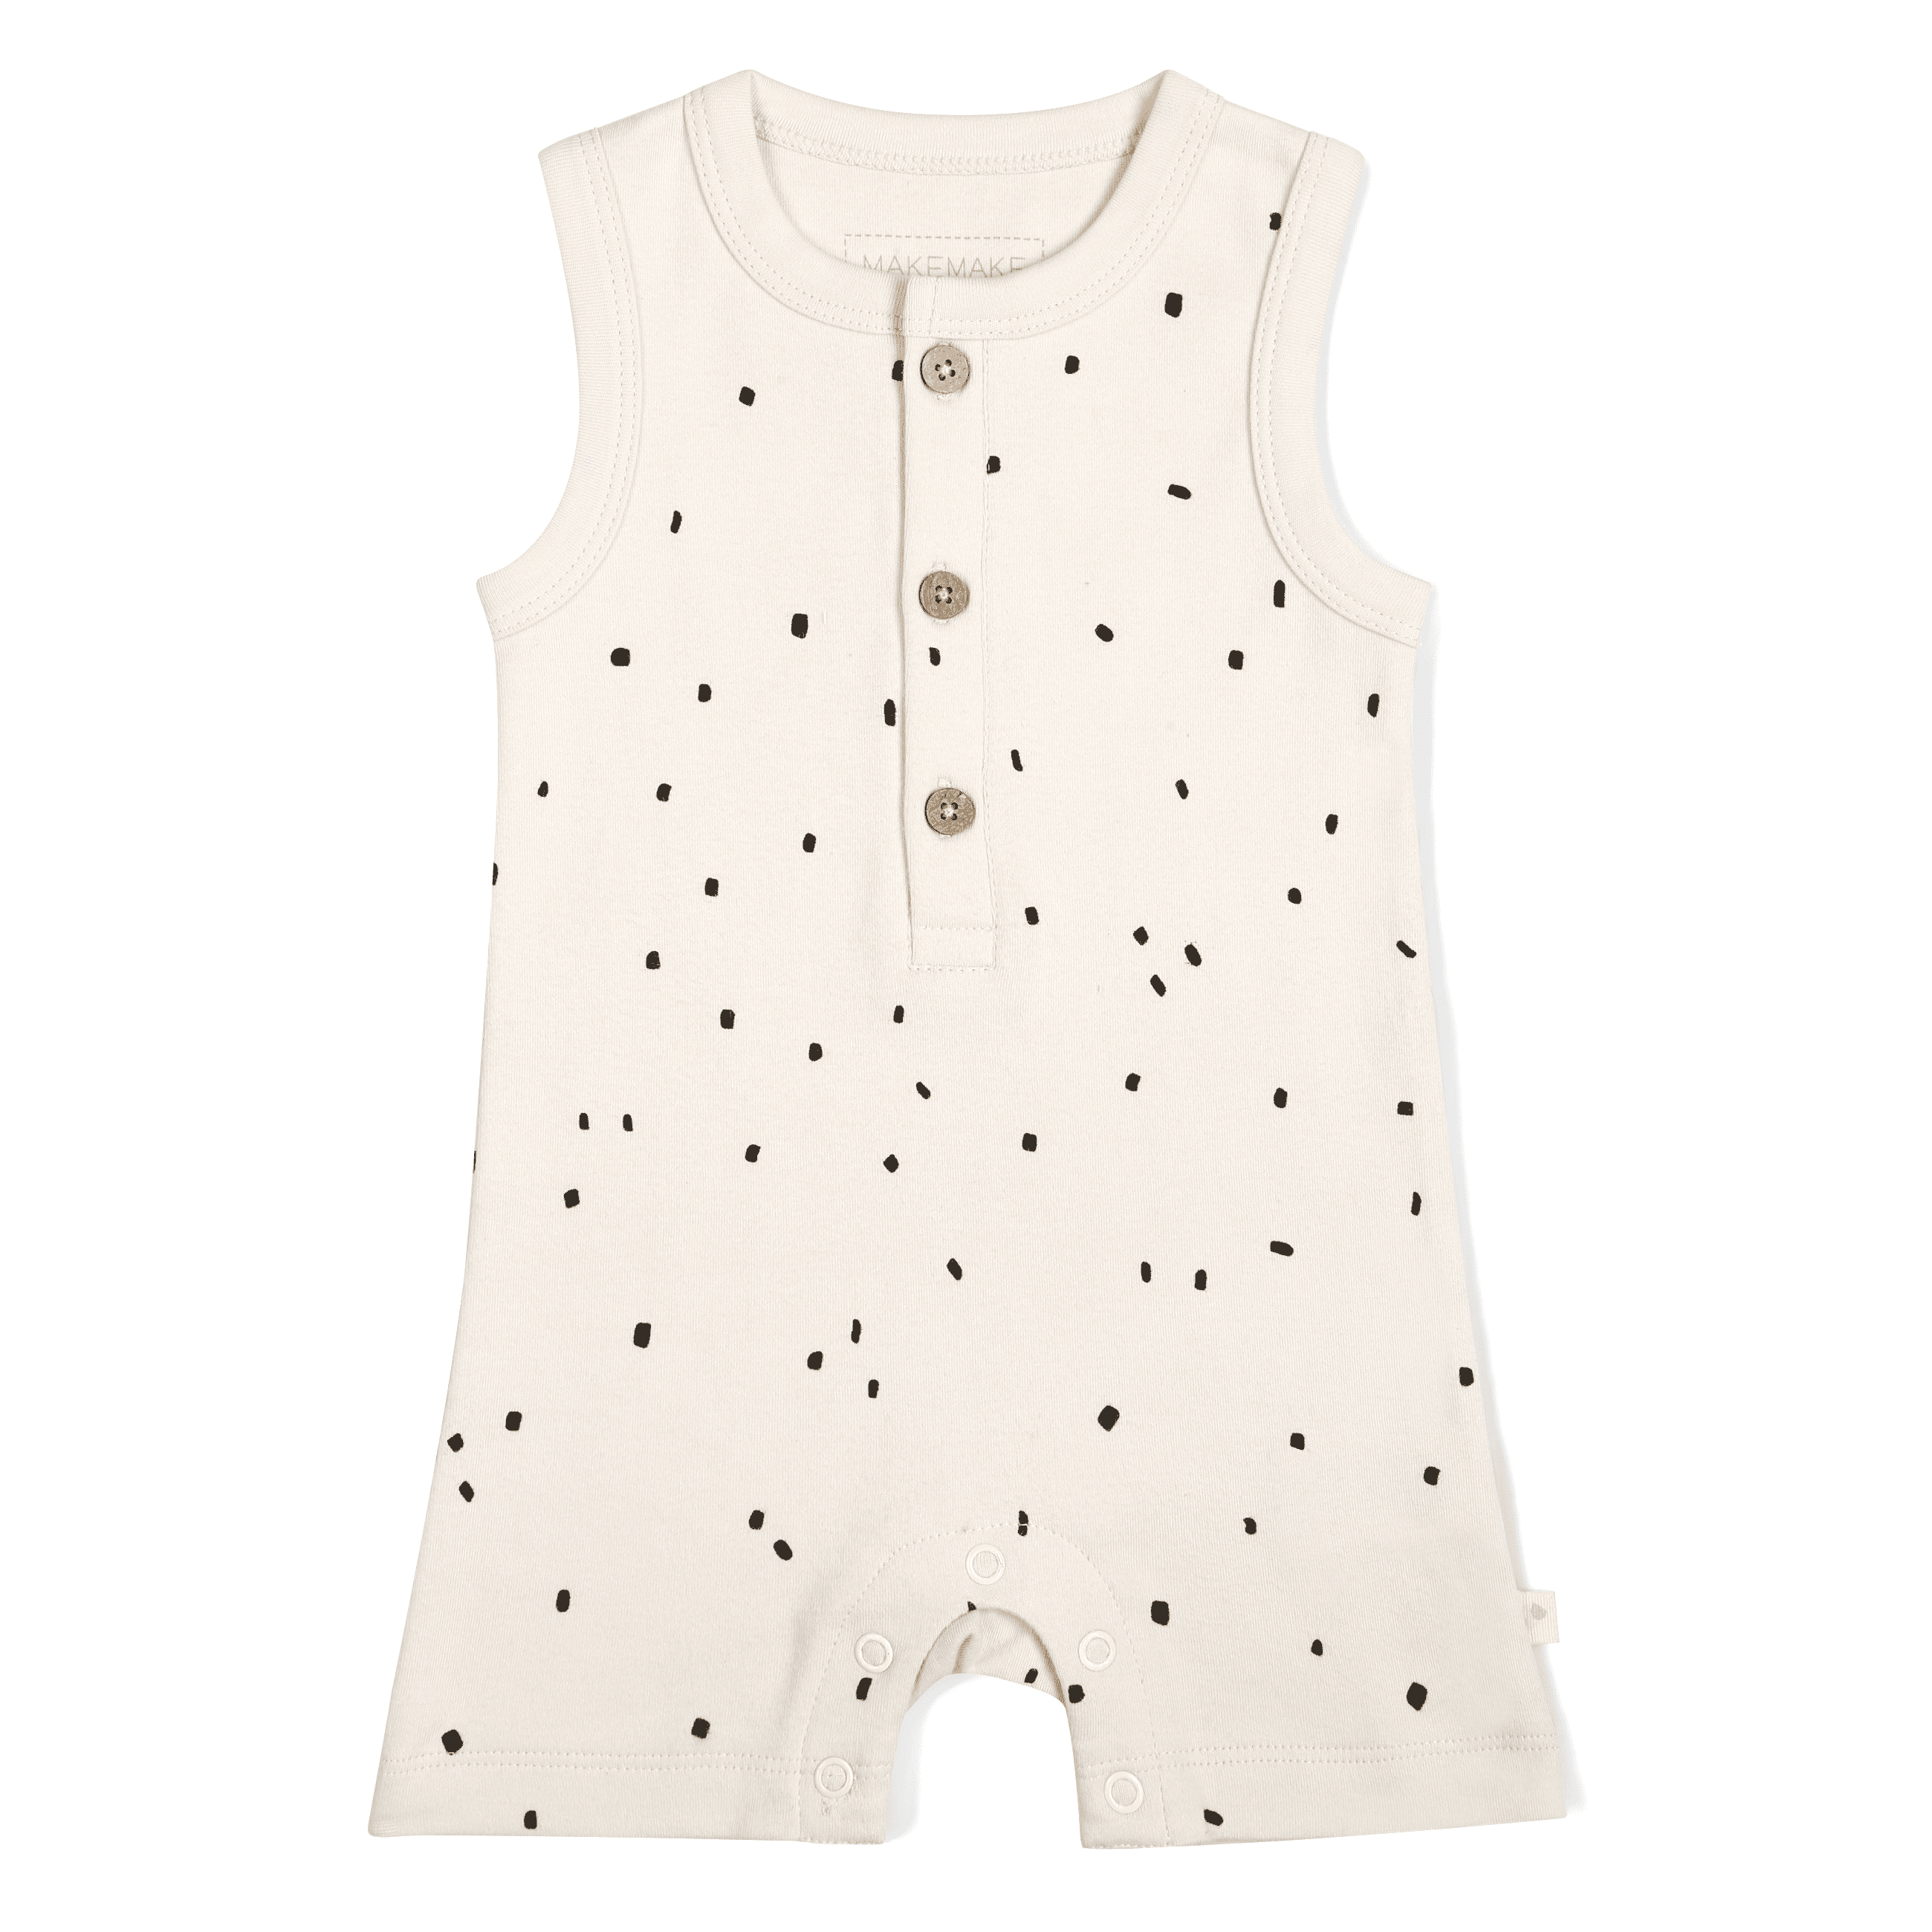 A sleeveless, cream-colored toddler onesie with black polka dots, featuring a round neckline, three wooden button closures at the chest, and snap fasteners at the crotch. - Makemake Organics' Organic Sleeveless Short Romper in Pixie Dots